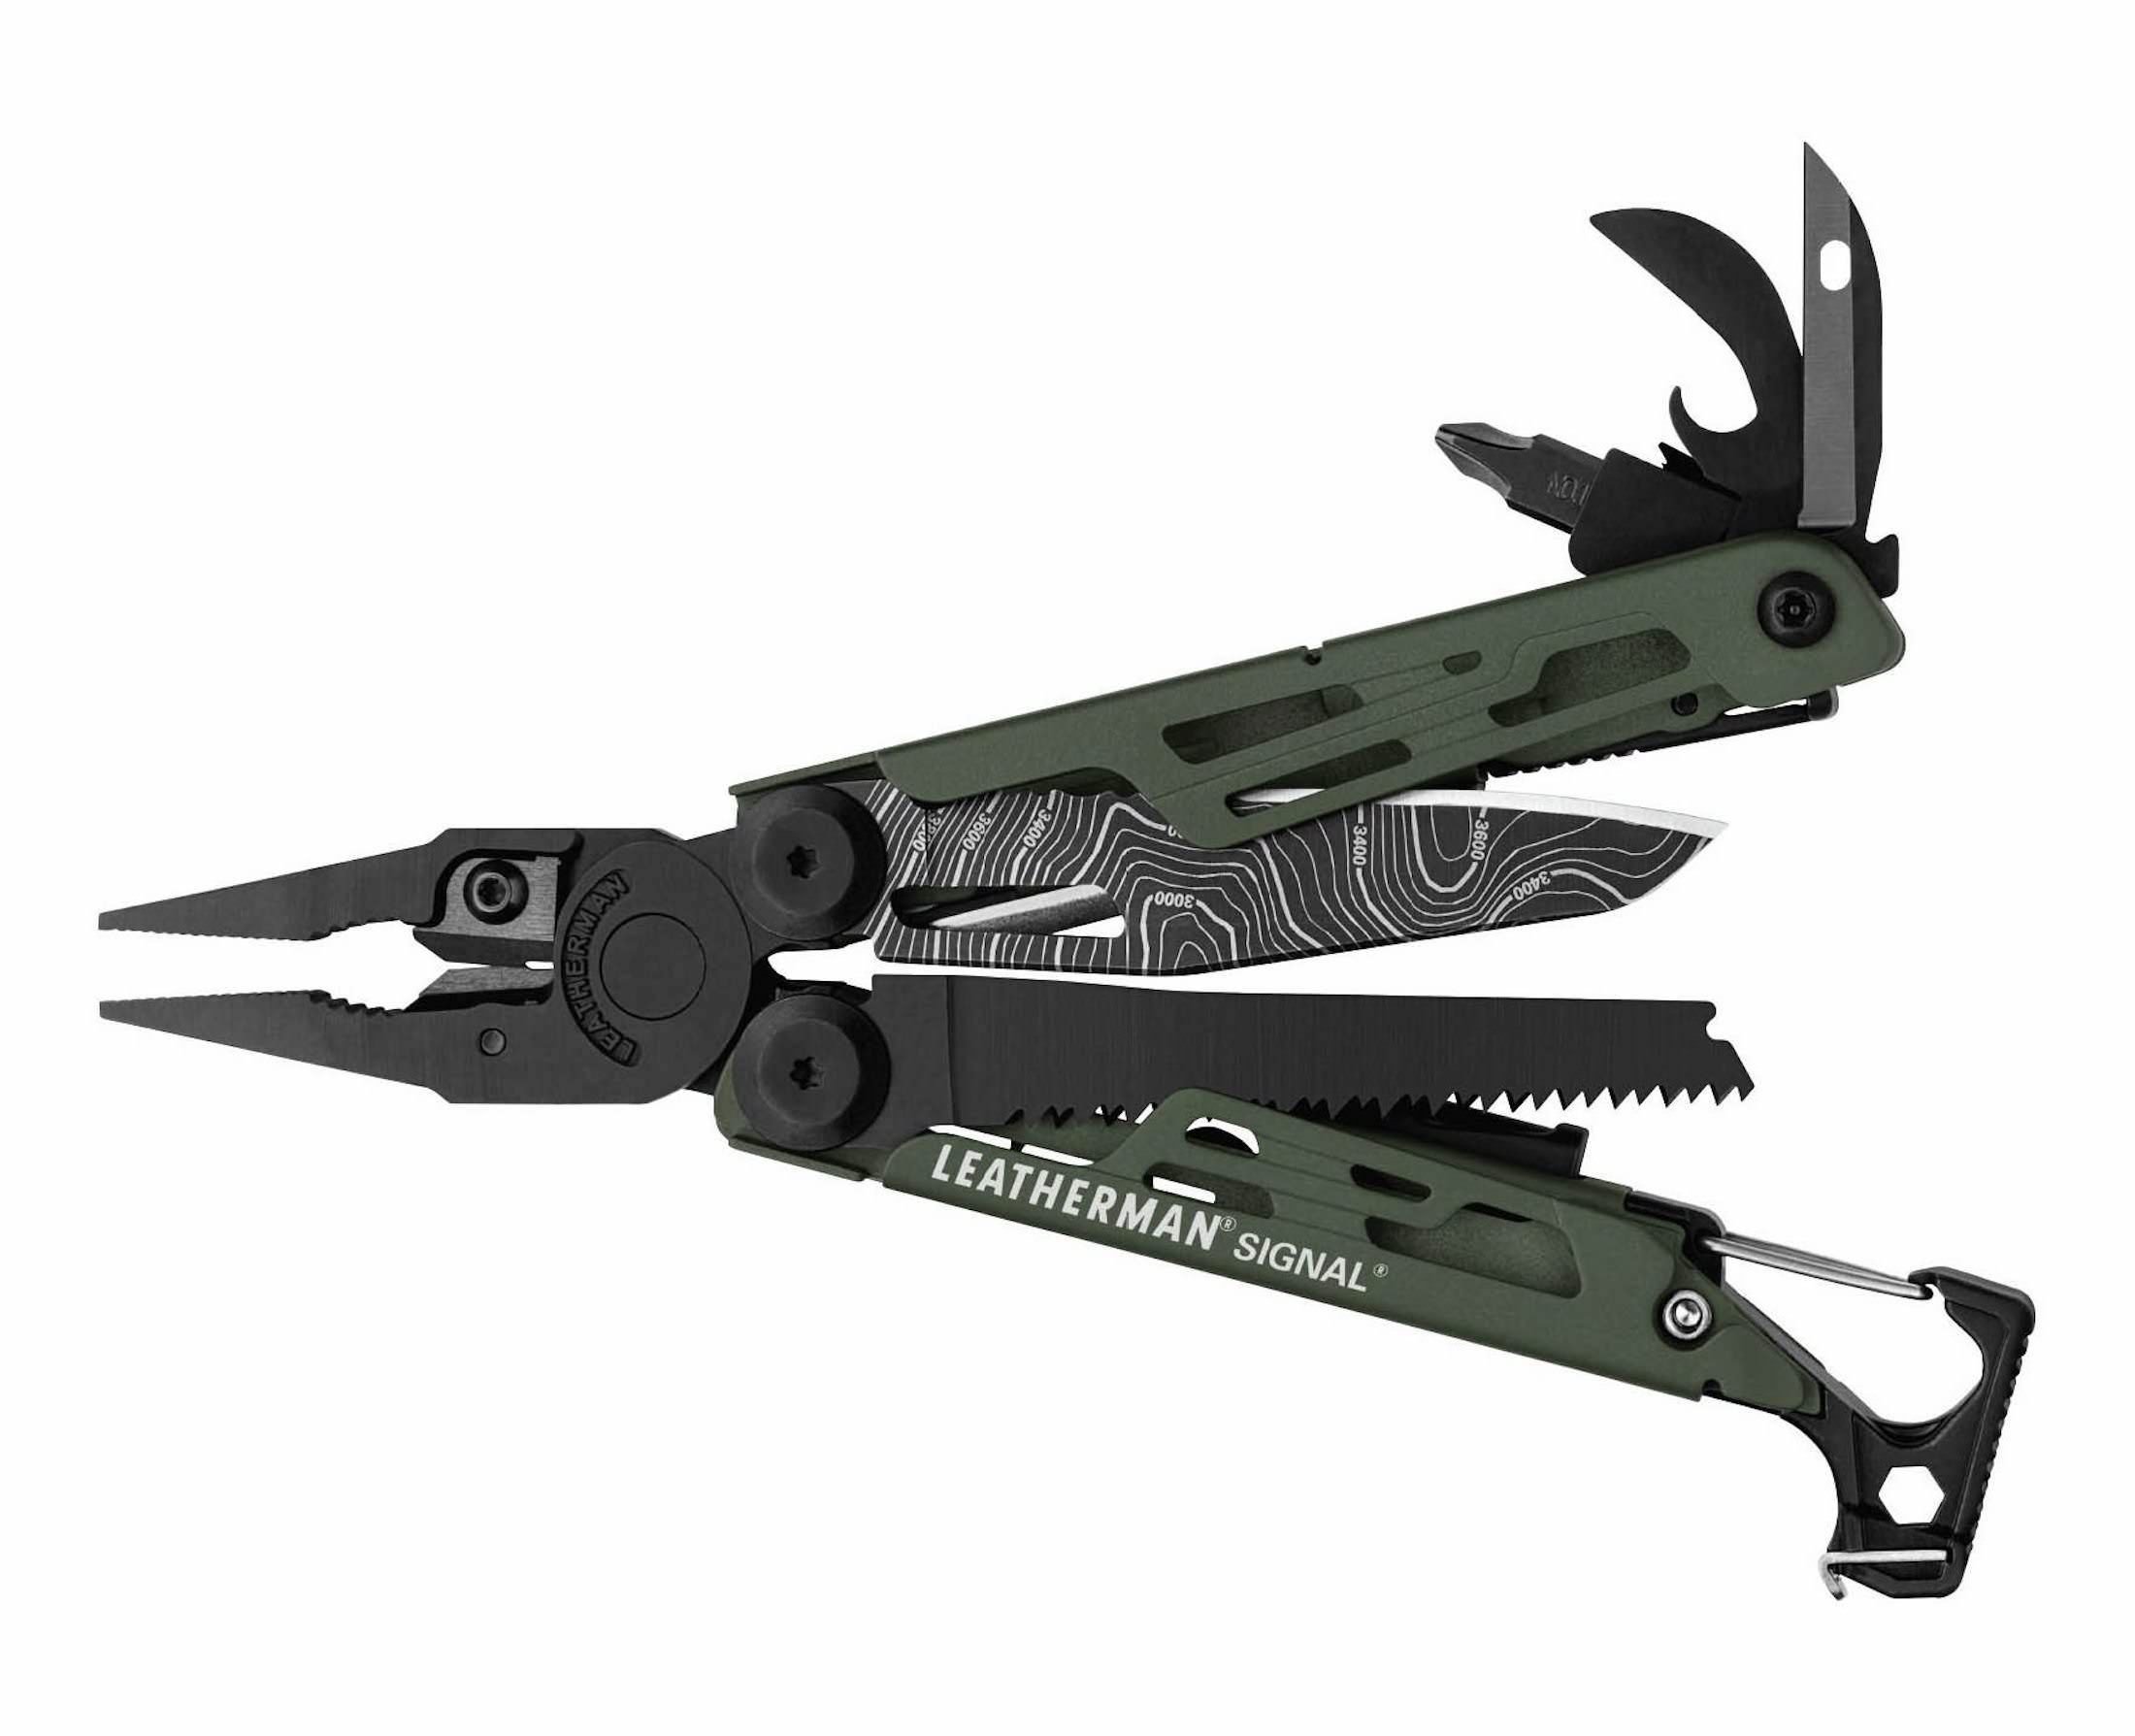 Noob Survival Test With The Leatherman Signal